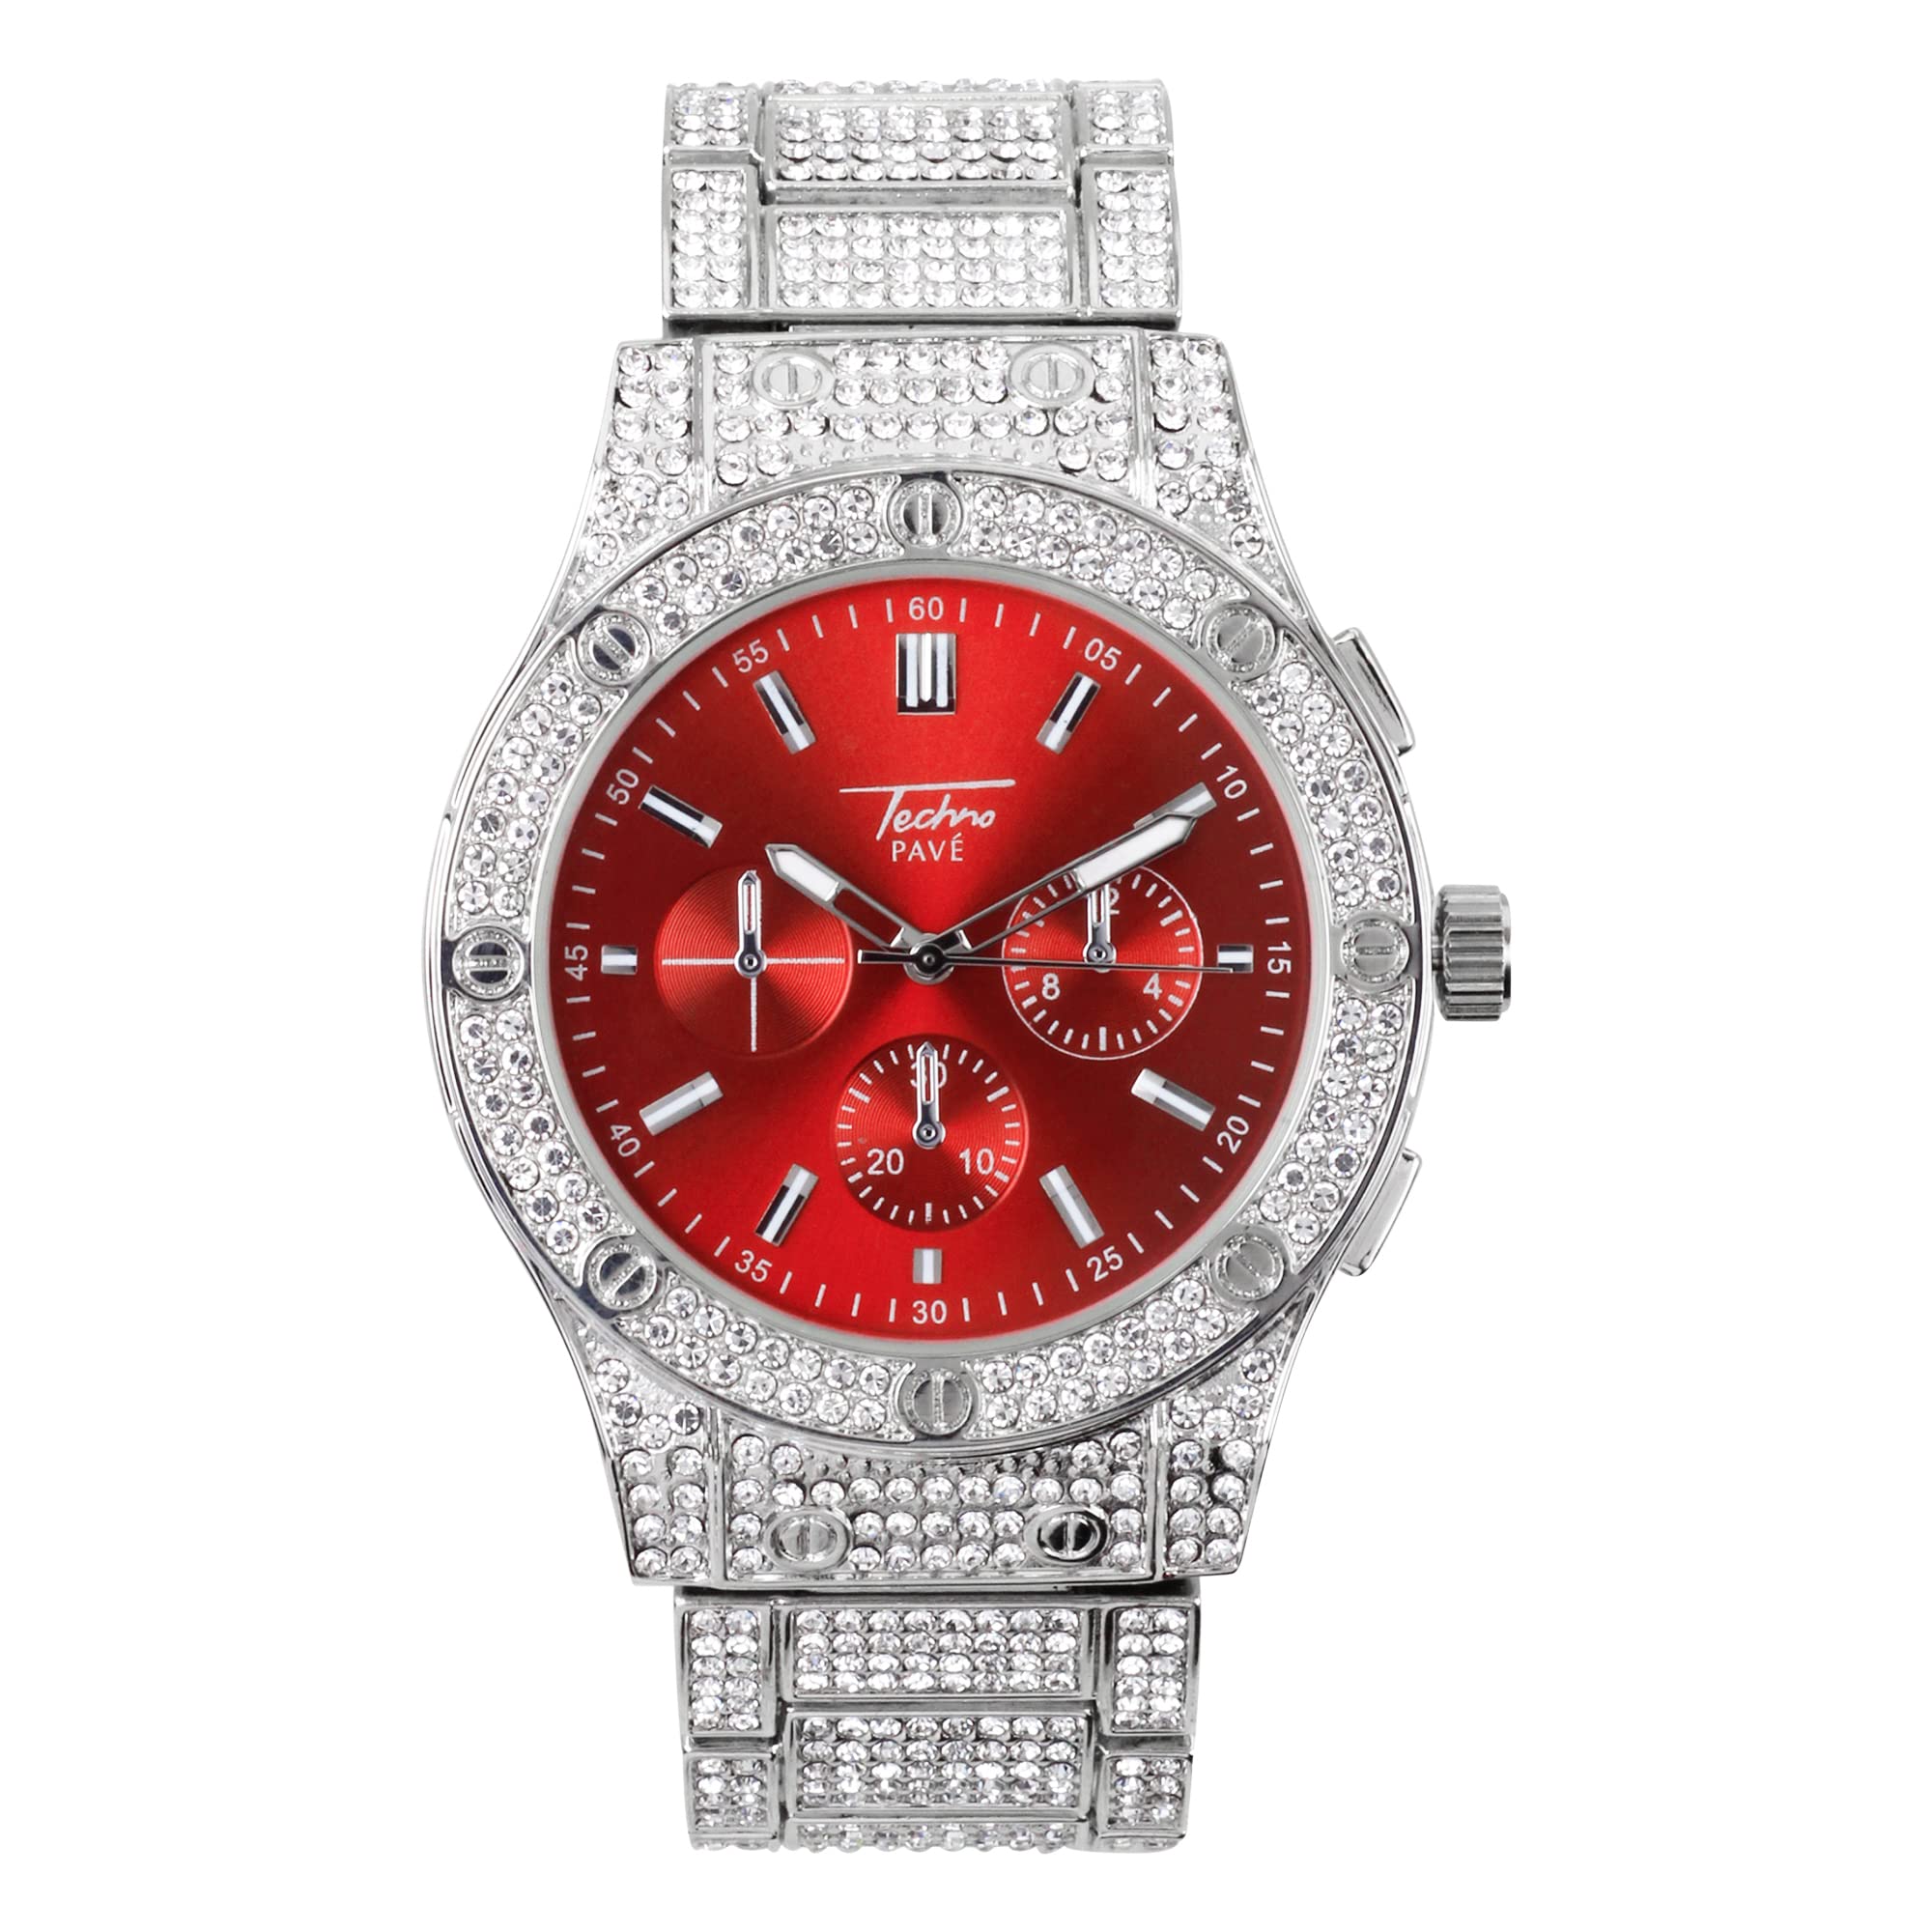 Men's Round Iced Out Watch 42mm Silver